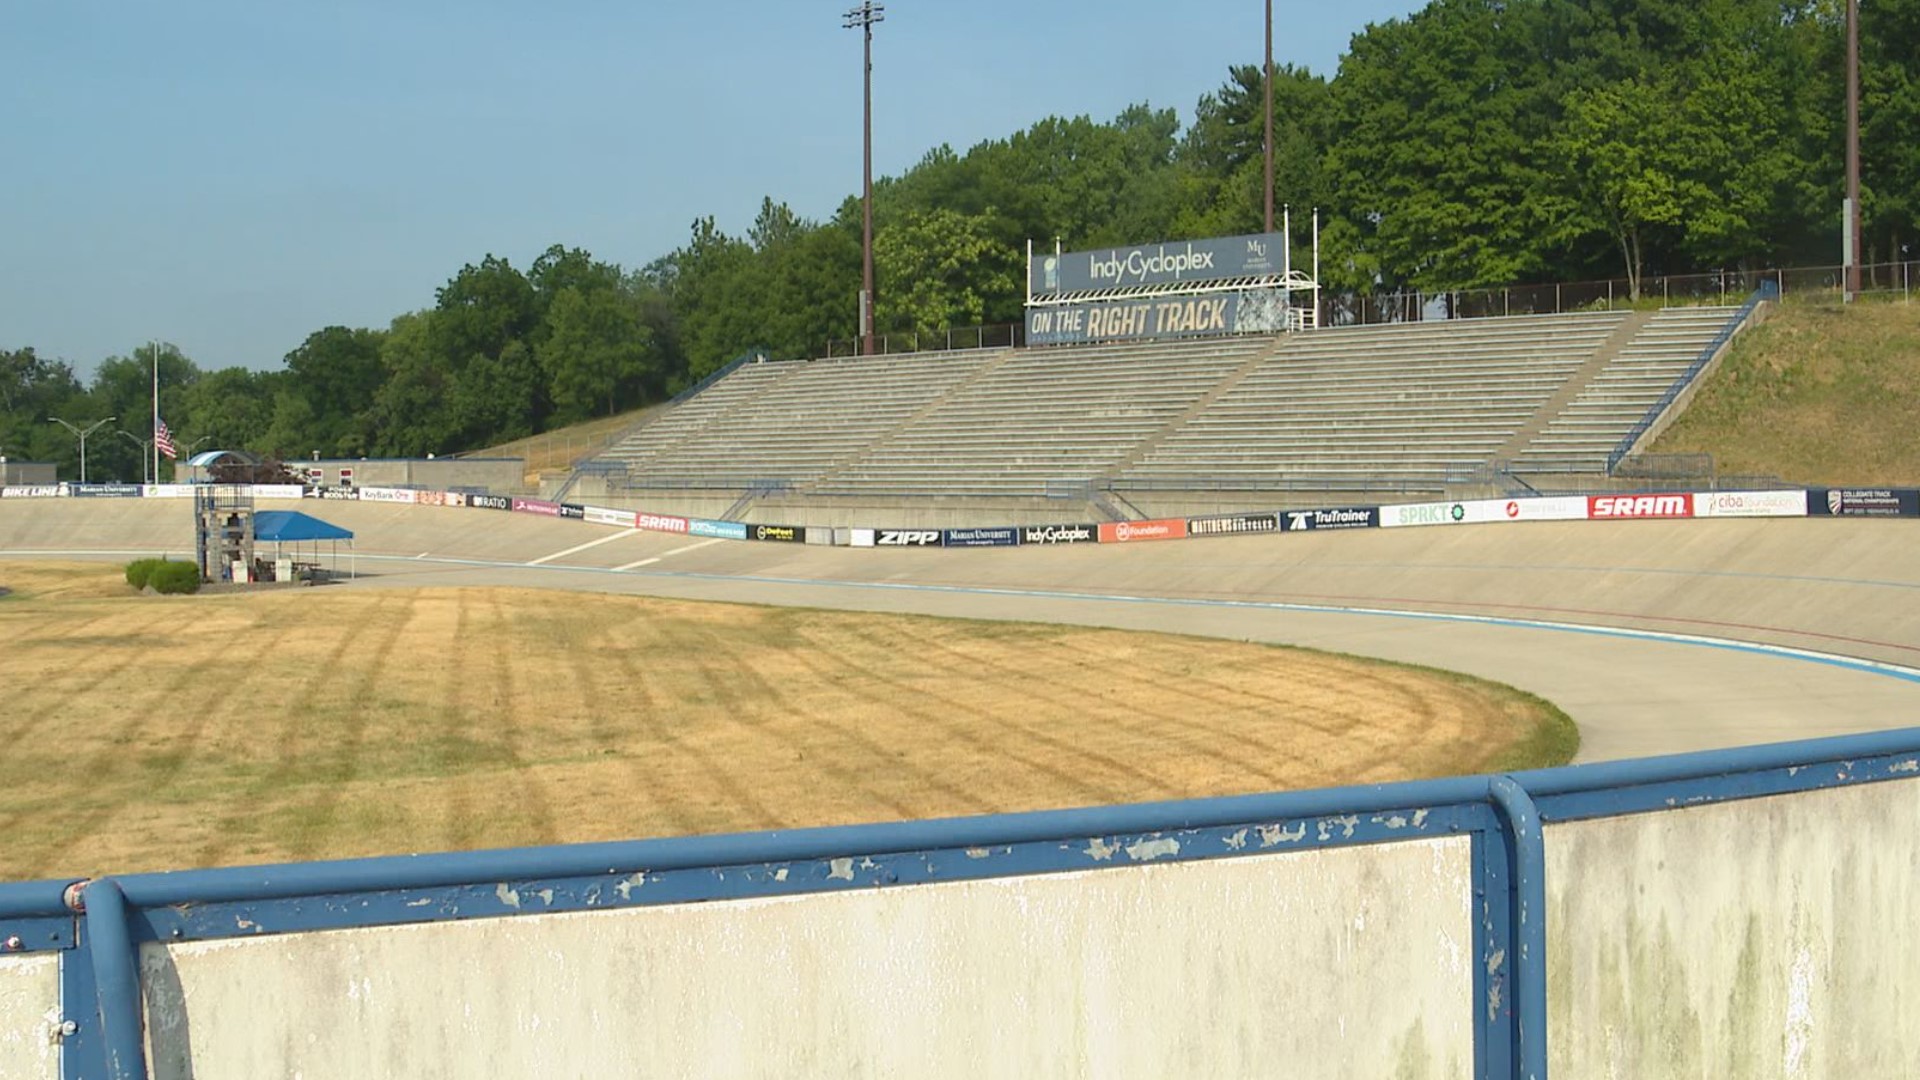 On Friday, the official 40th anniversary, the velodrome will host a special celebration.